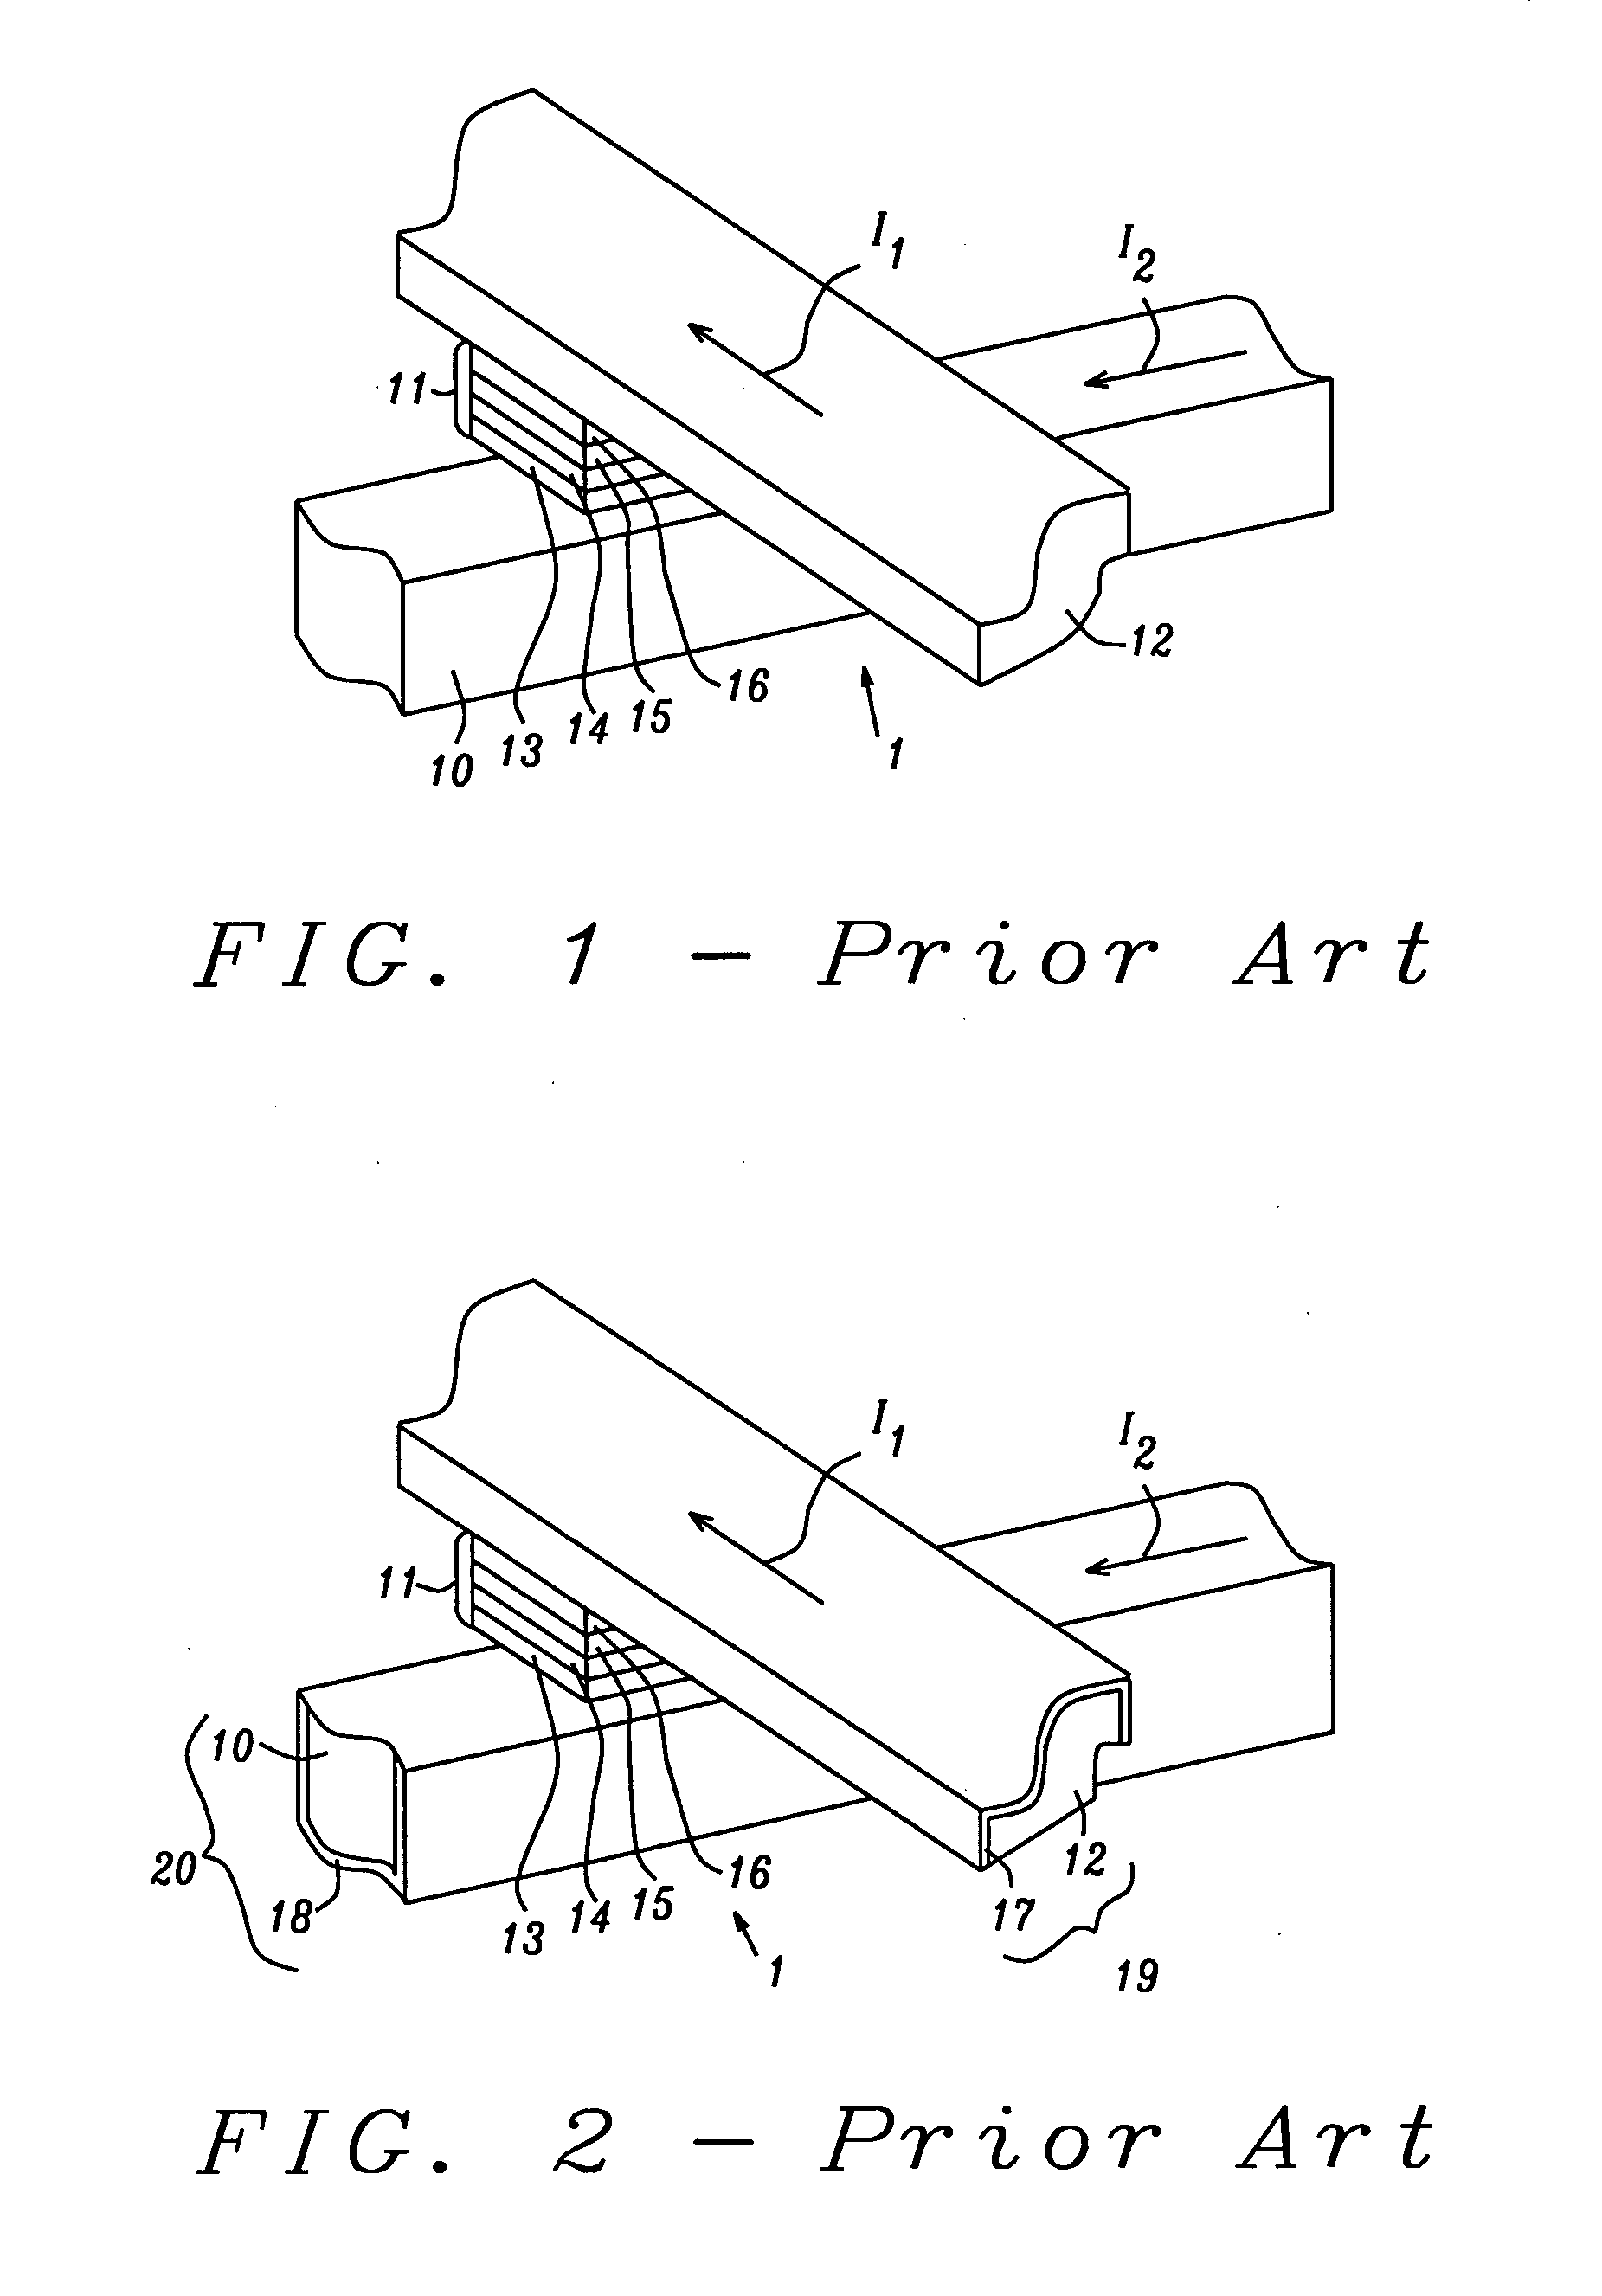 Design and fabrication methods of partial cladded write line to enhance write margin for magnetic random access memory